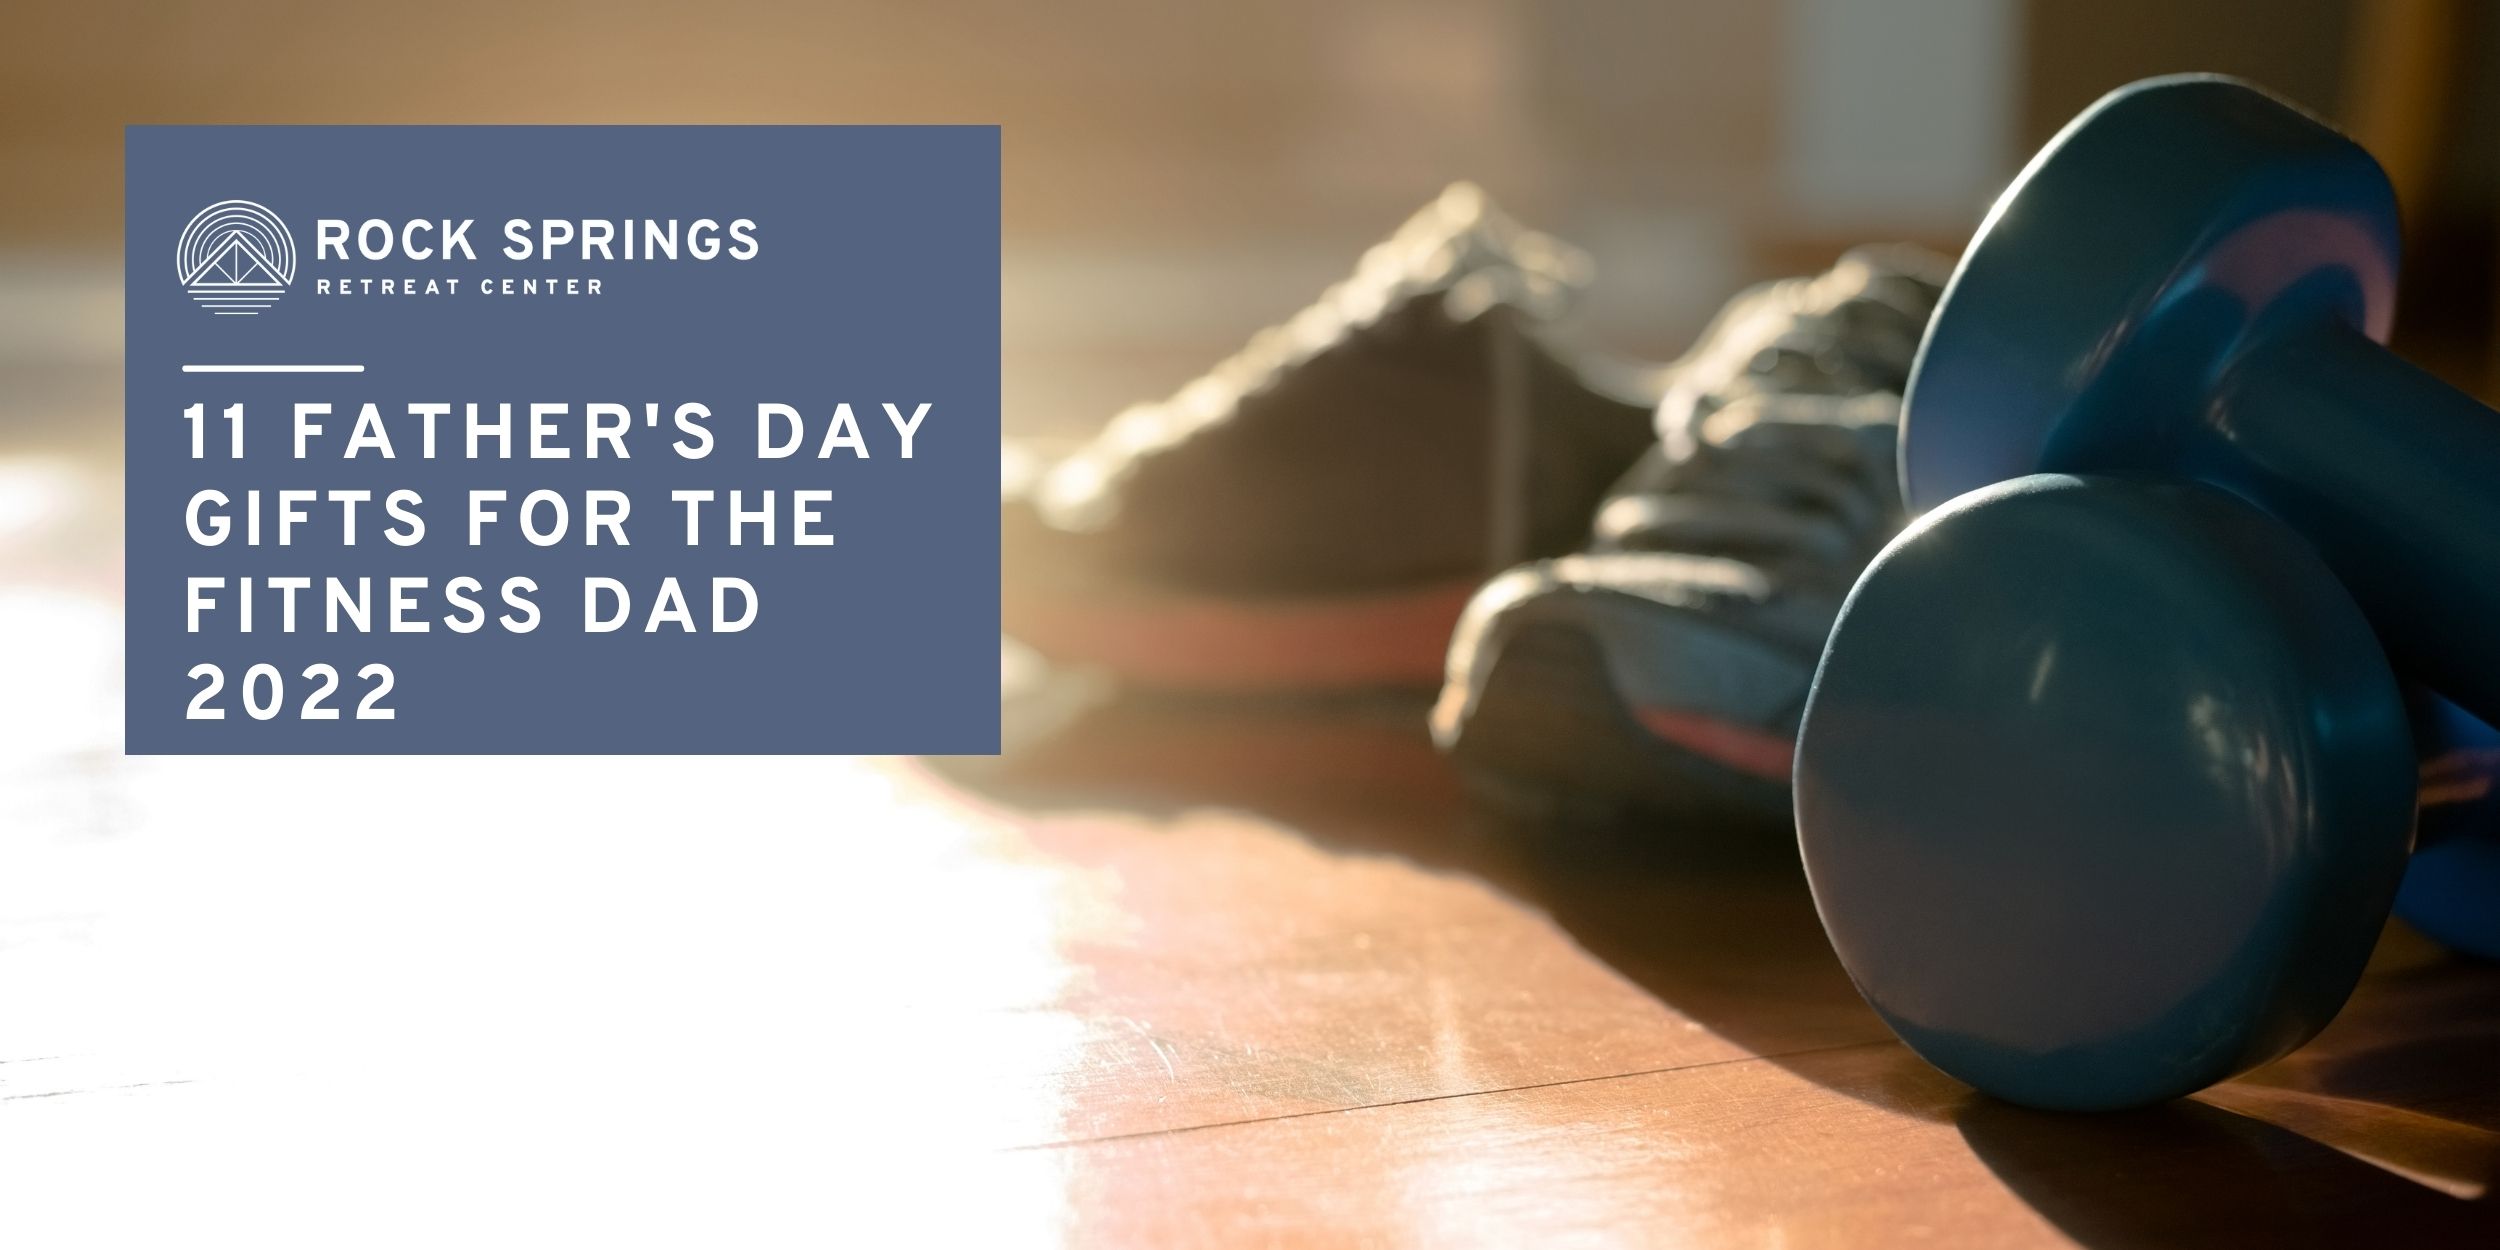 11 Father’s Day Gifts for the Fitness Dad 2022